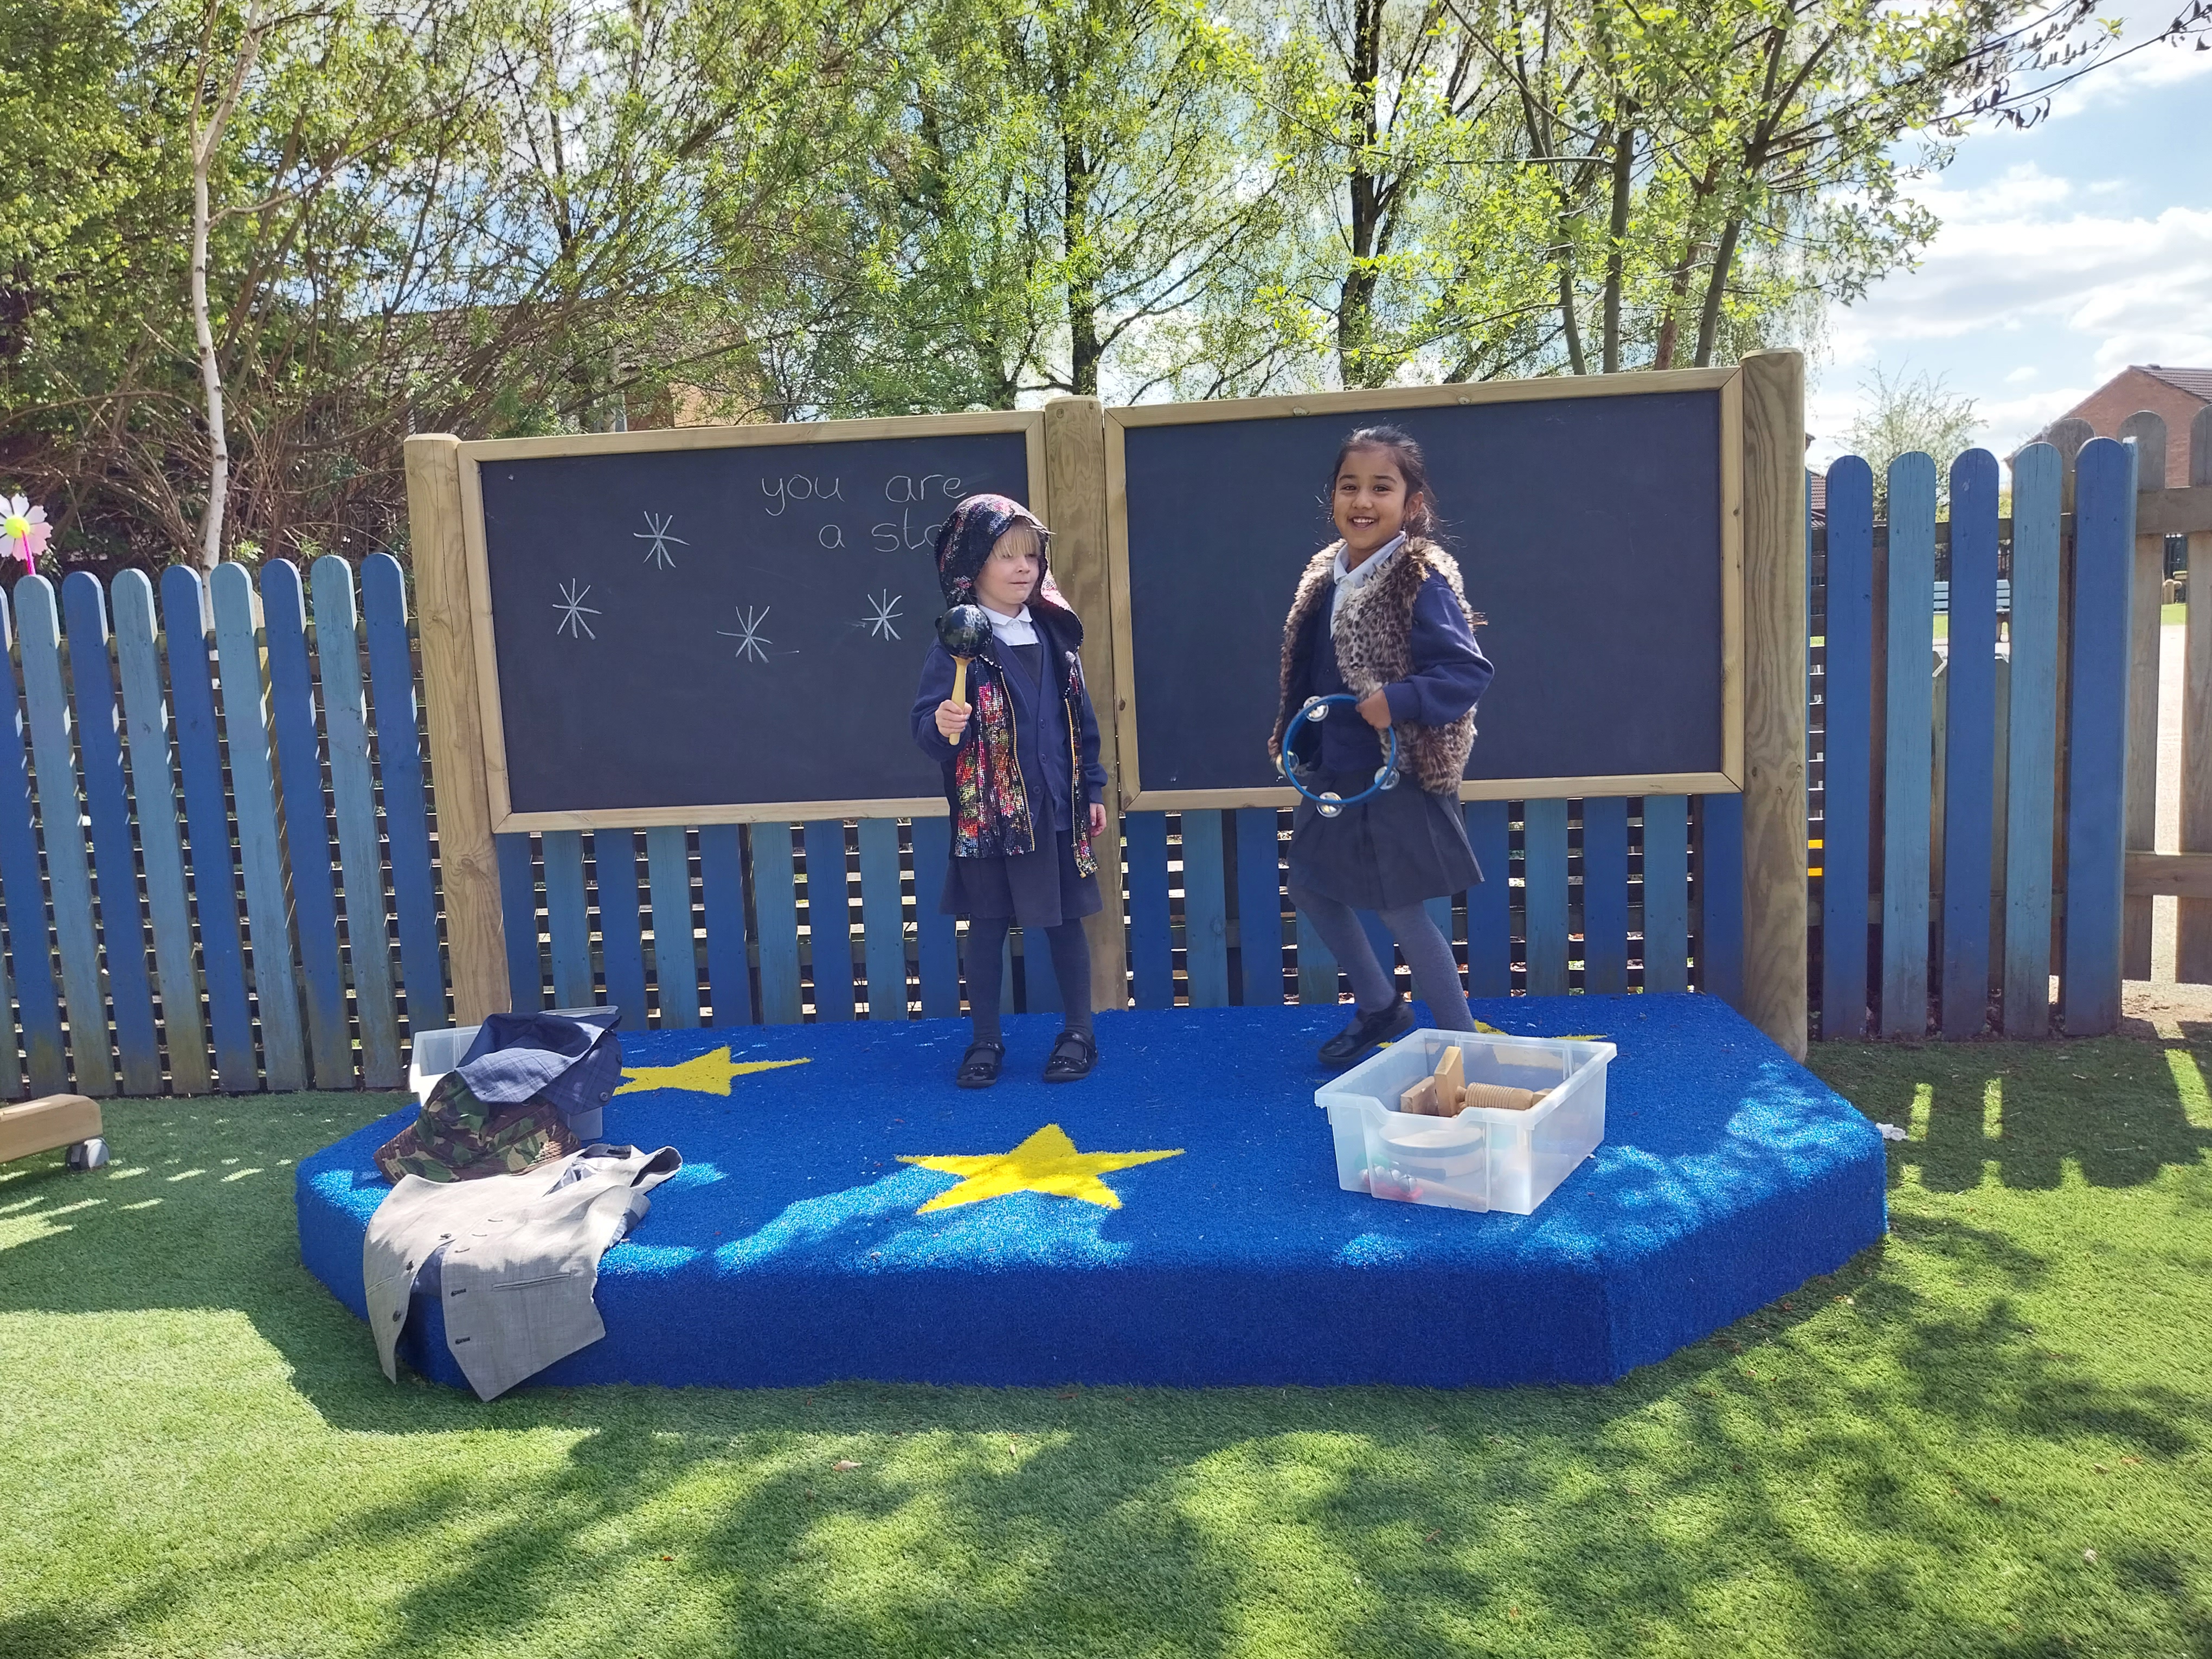 2 children are stood on a small stage that has three wooden posts placed behind it, with a chalkboard placed between each one. The stage is a semi-circle with a blue saferturf surfacing. There are yellow Saferturf stars placed on the stage too. The two children are looking at the camera as they hold props and the chalkboard shows "you are a star" on it.